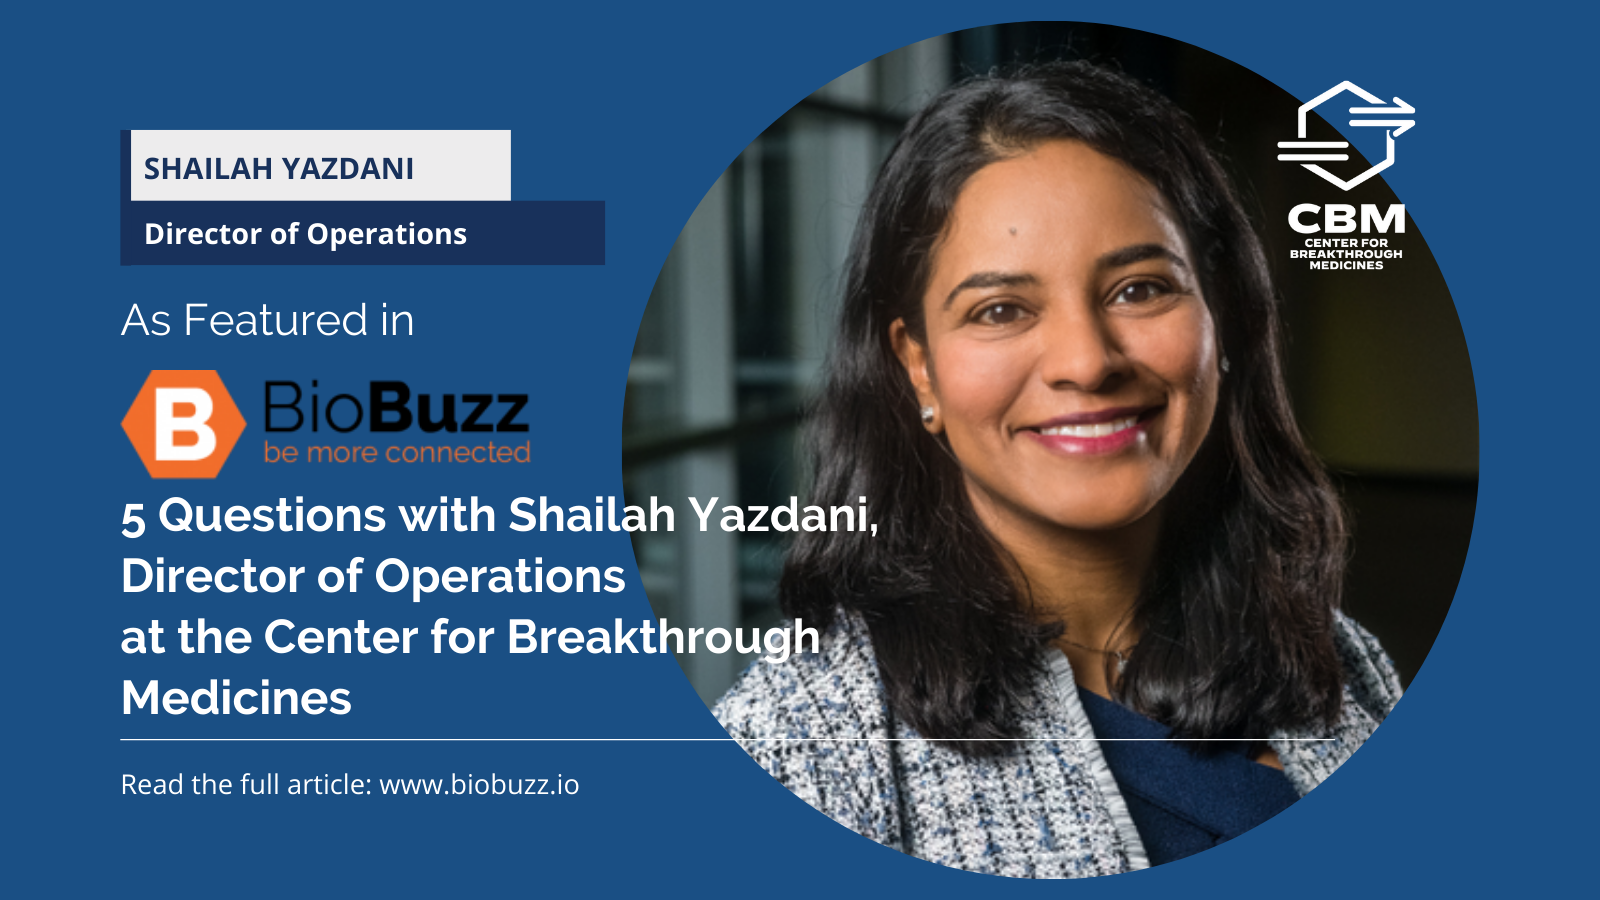 5 questions with Shailah Yazdani Bio Buzz feature interview promotional image